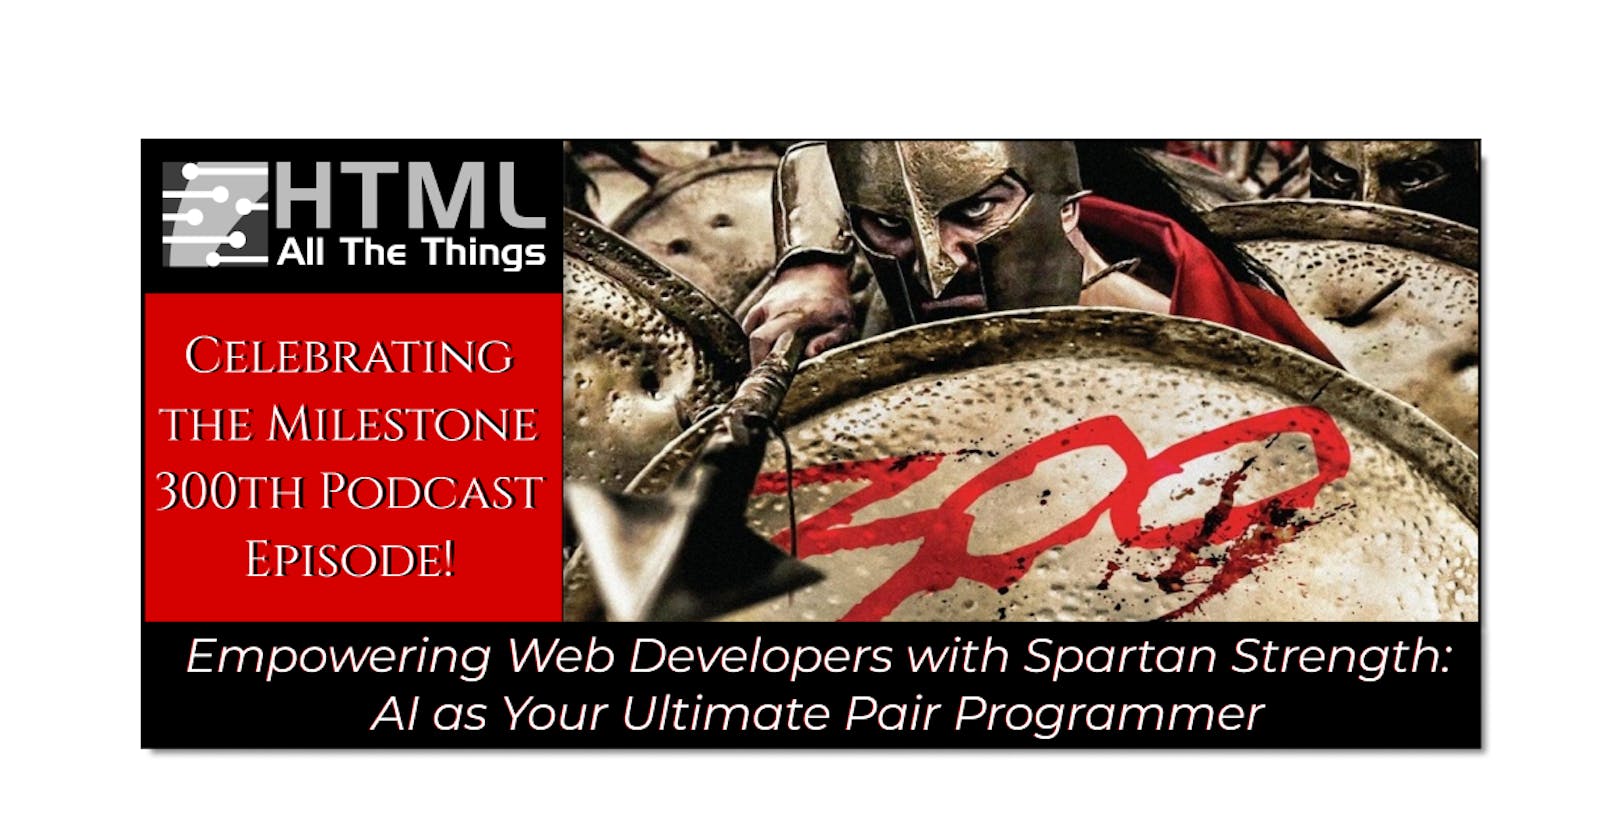 Empowering Web Developers with Spartan Strength: AI as Your Ultimate Pair Programmer